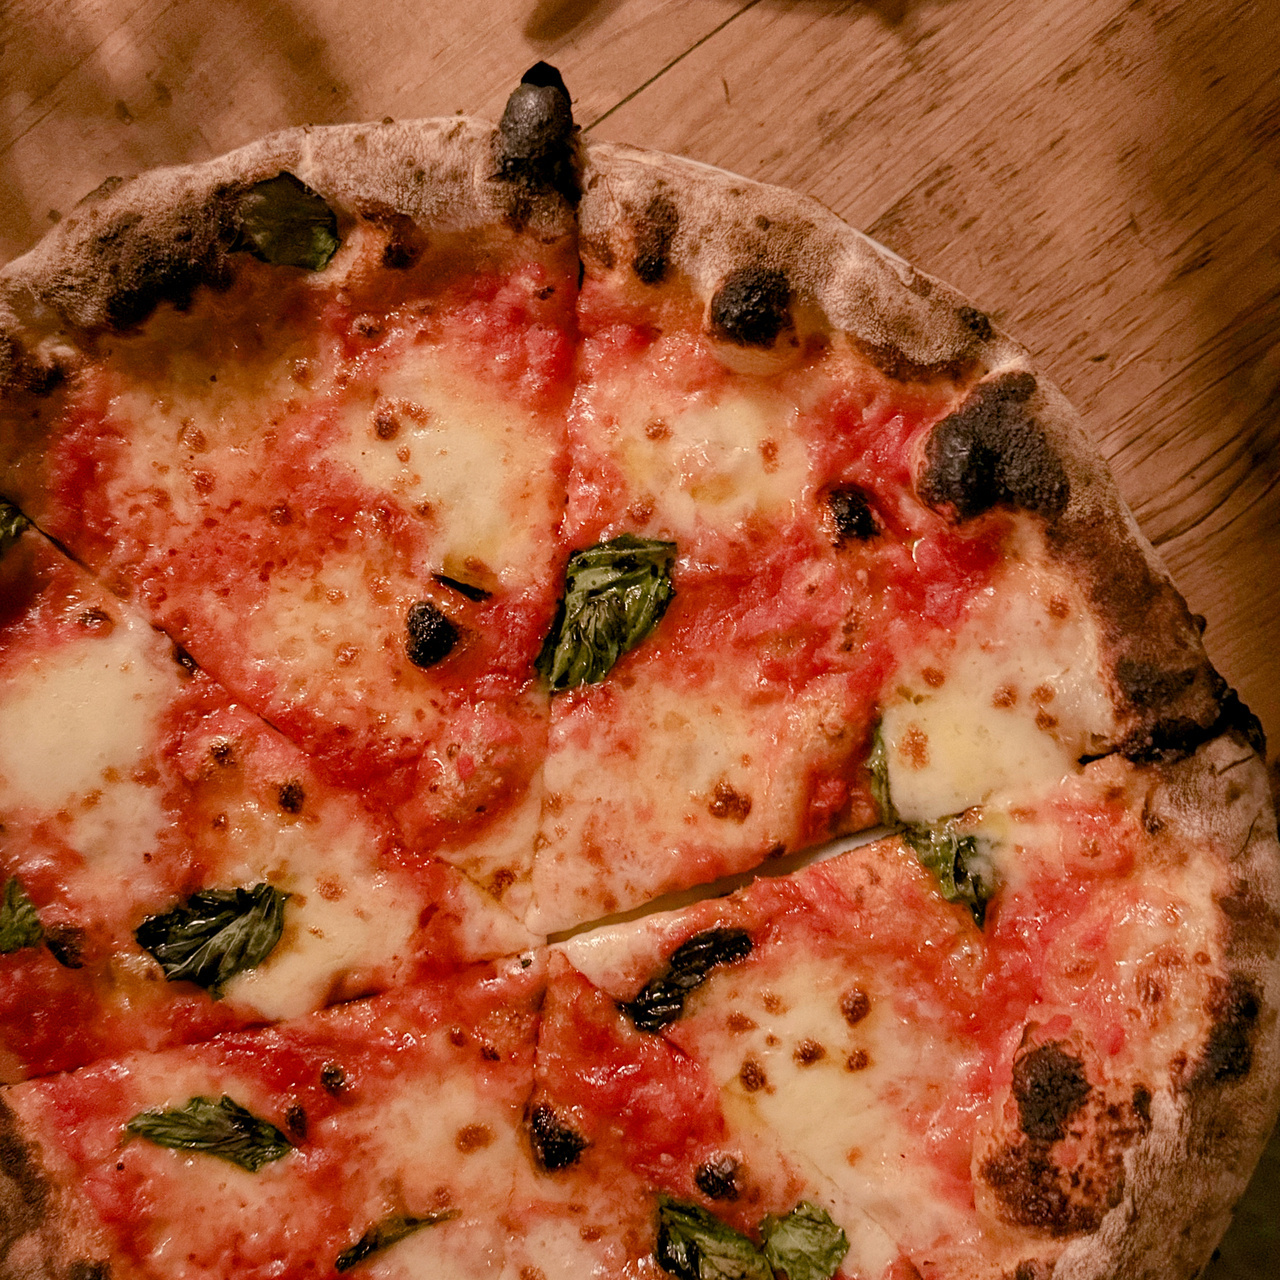 Margherita pizza with charred basil and dark crust